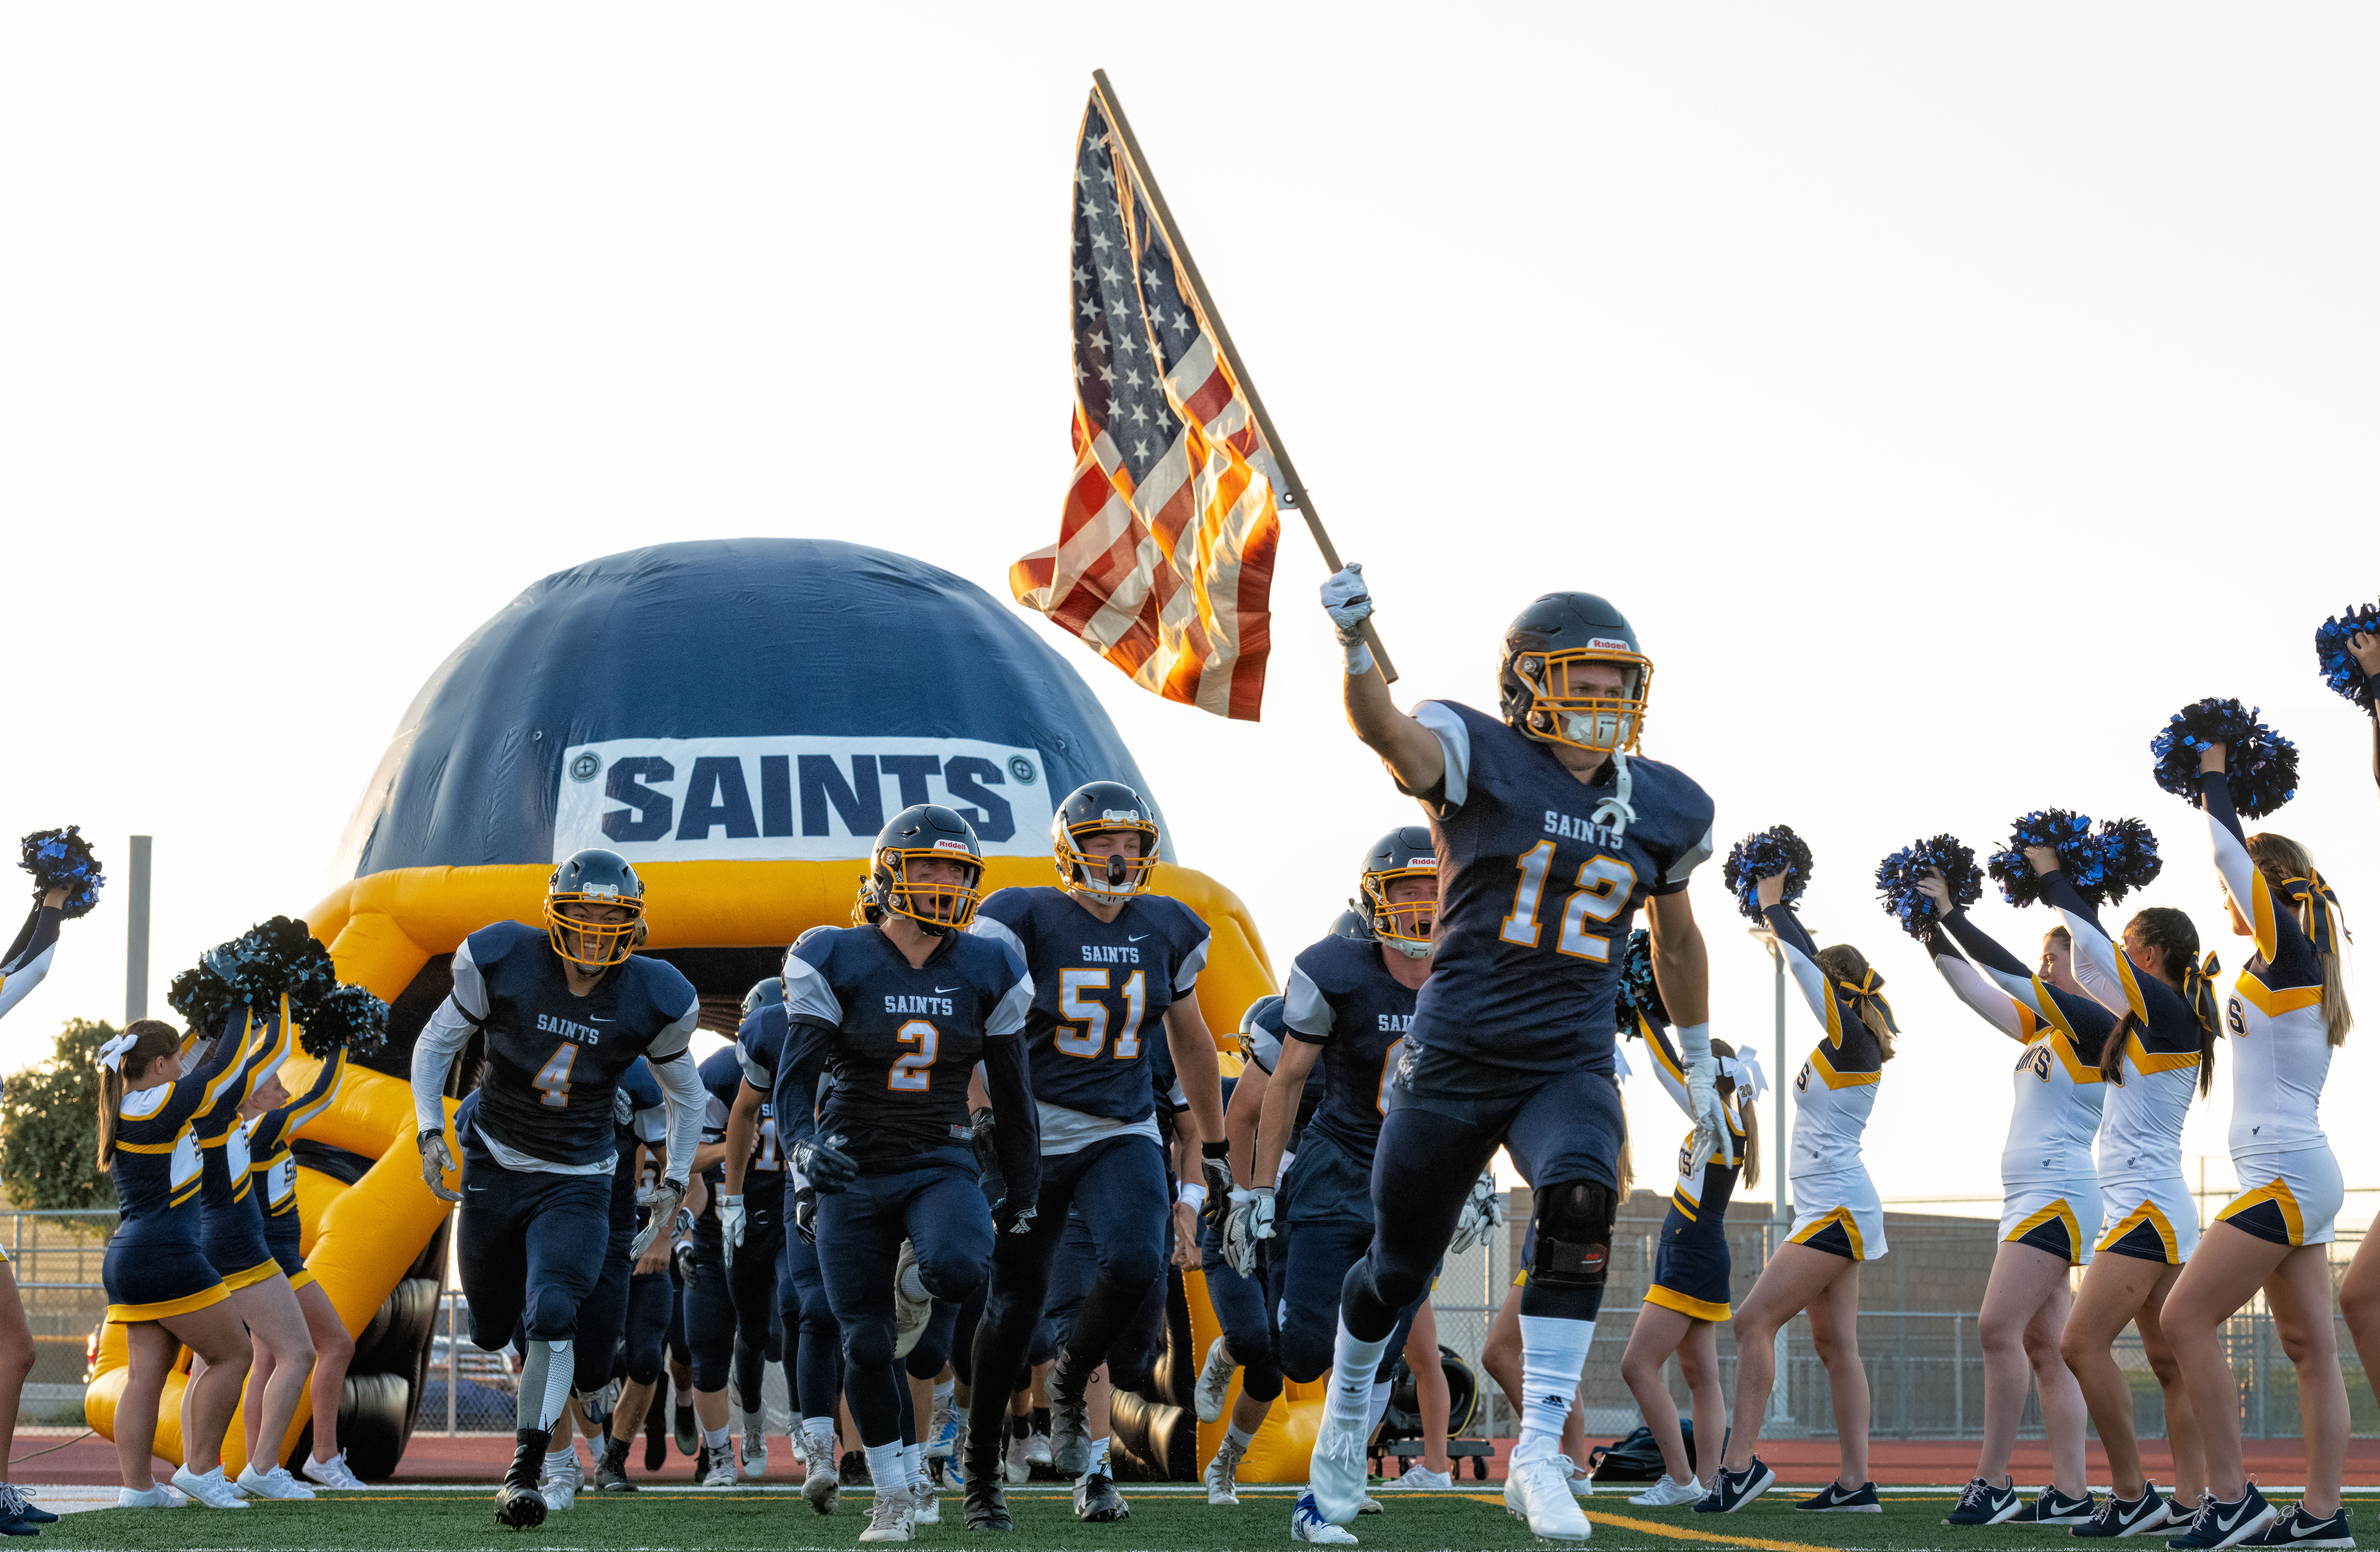 crean-lutheran-football-team-holds-on-to-defeat-saddleback-valley-christian-17-13-oc-sports